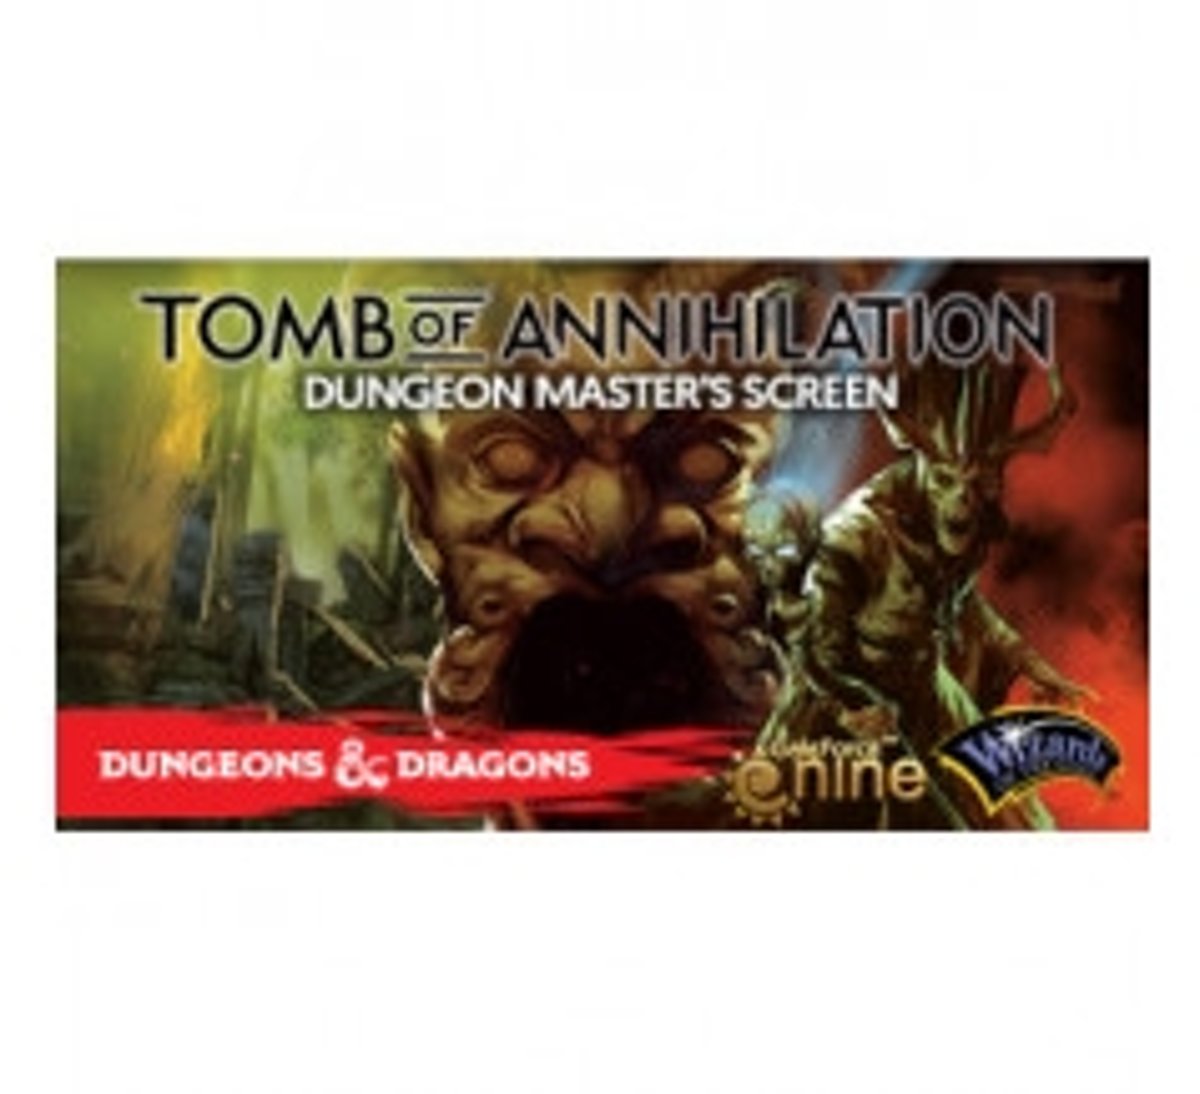 Dungeon Master's Screen Tomb of Annihilation D&D (Dungeons and Dragons)